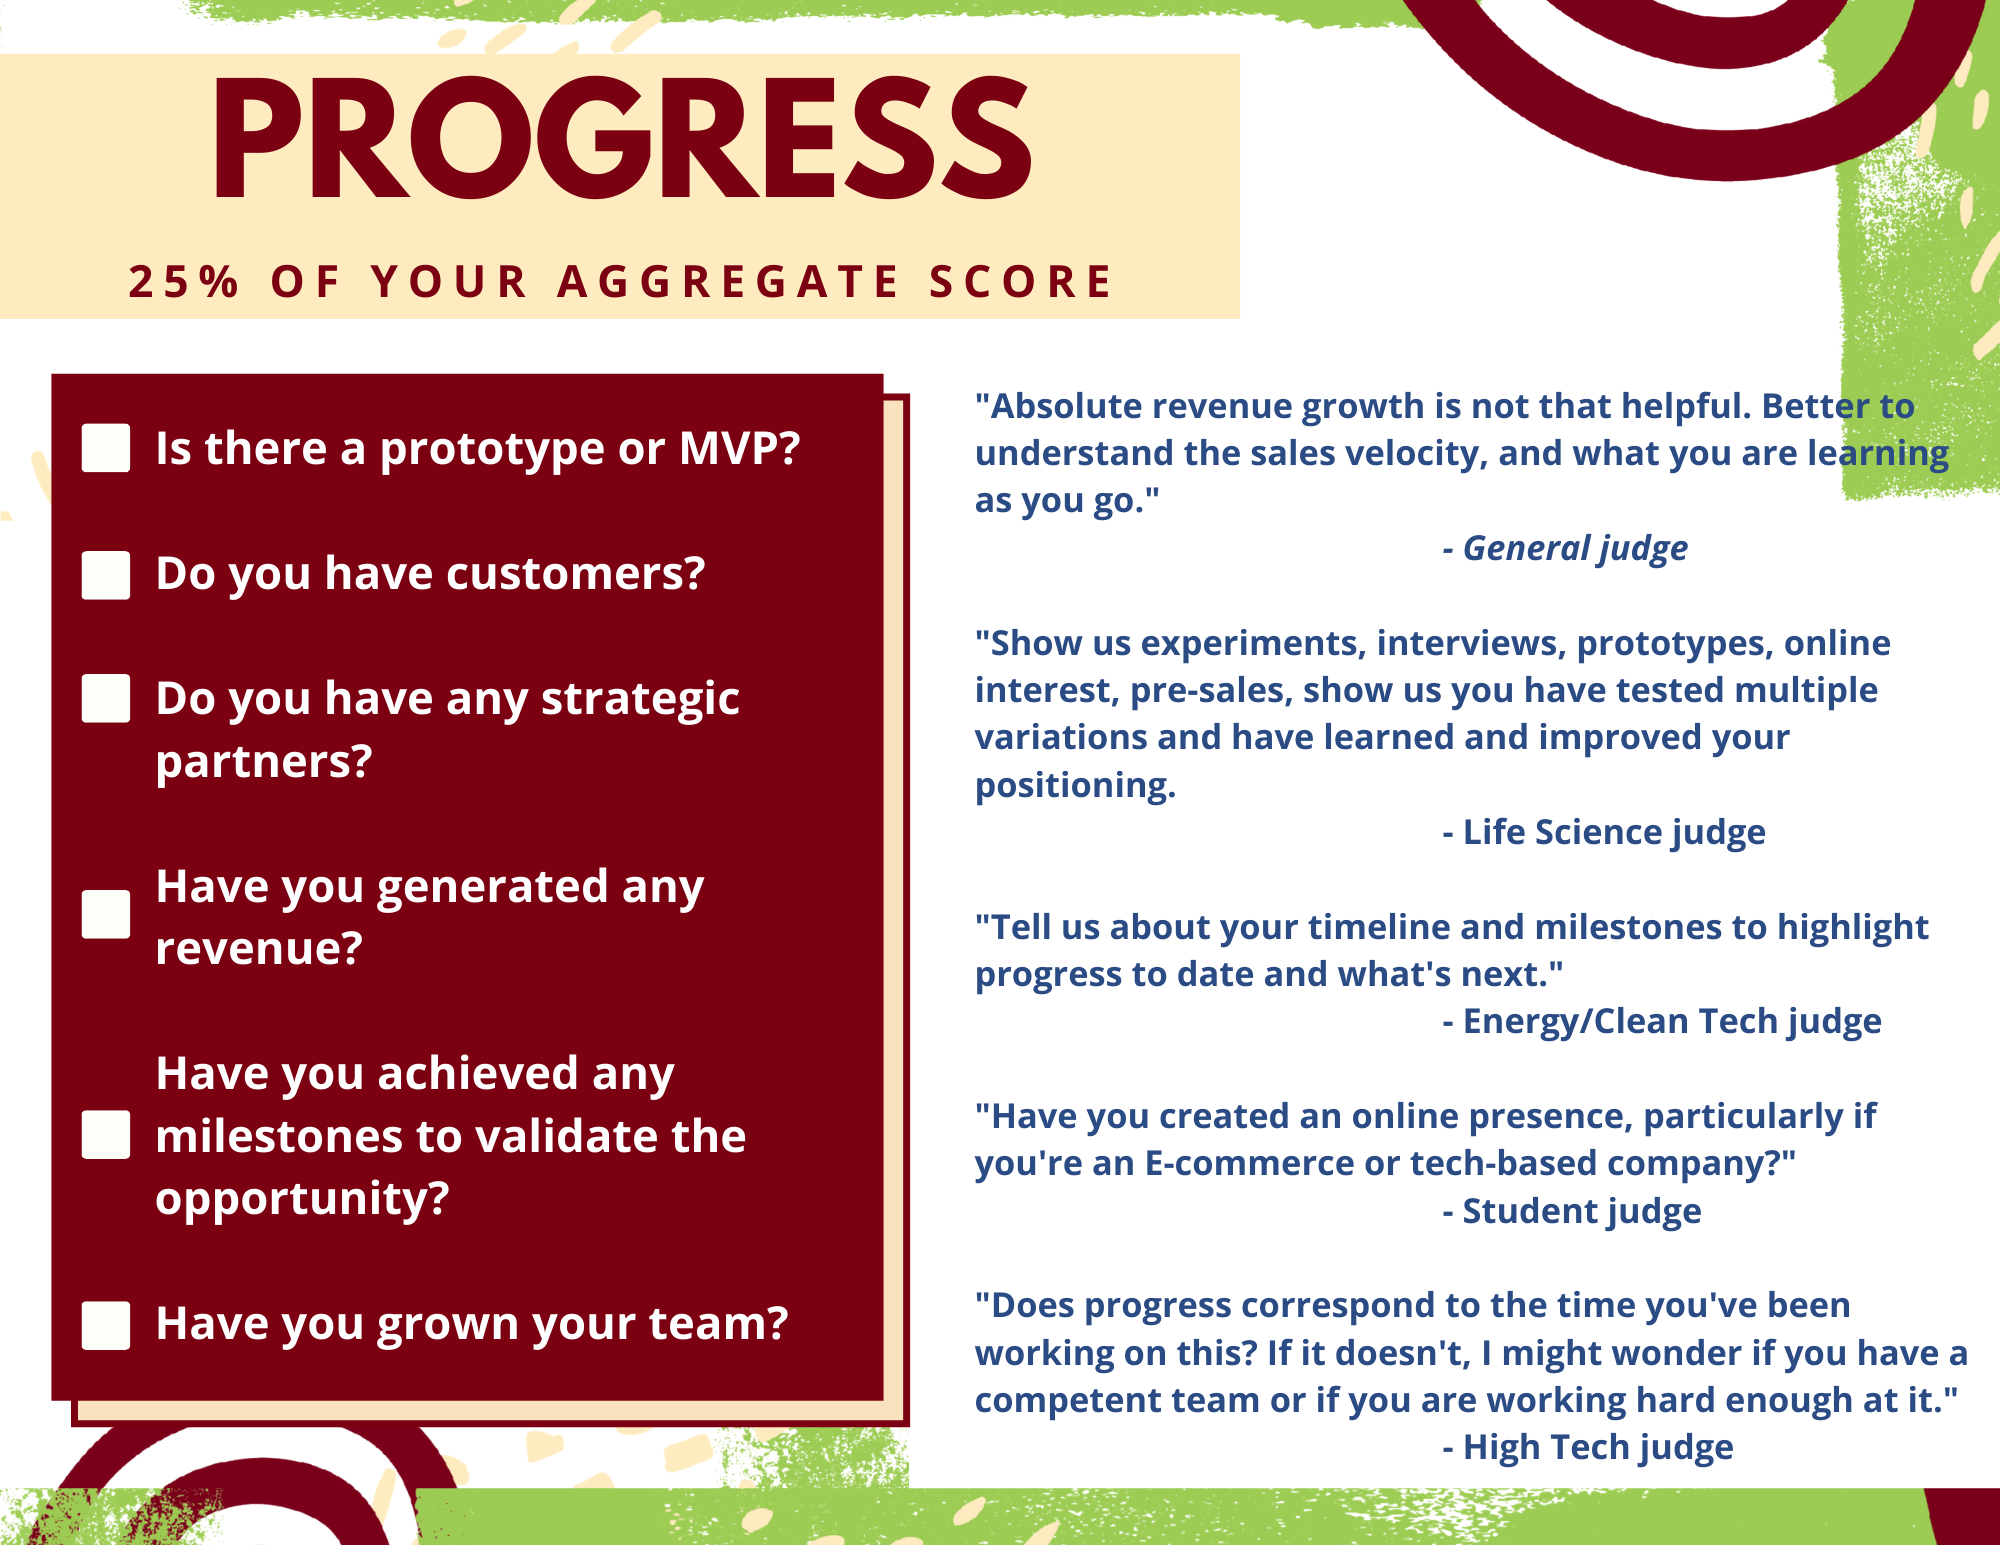 Progress components: Is there a prototype or MVP? Do you have customers? Do you have any strategic partners? Have you generated any revenue? Have you achieved any milestones to validate the opportunity? Have you grown your team? 